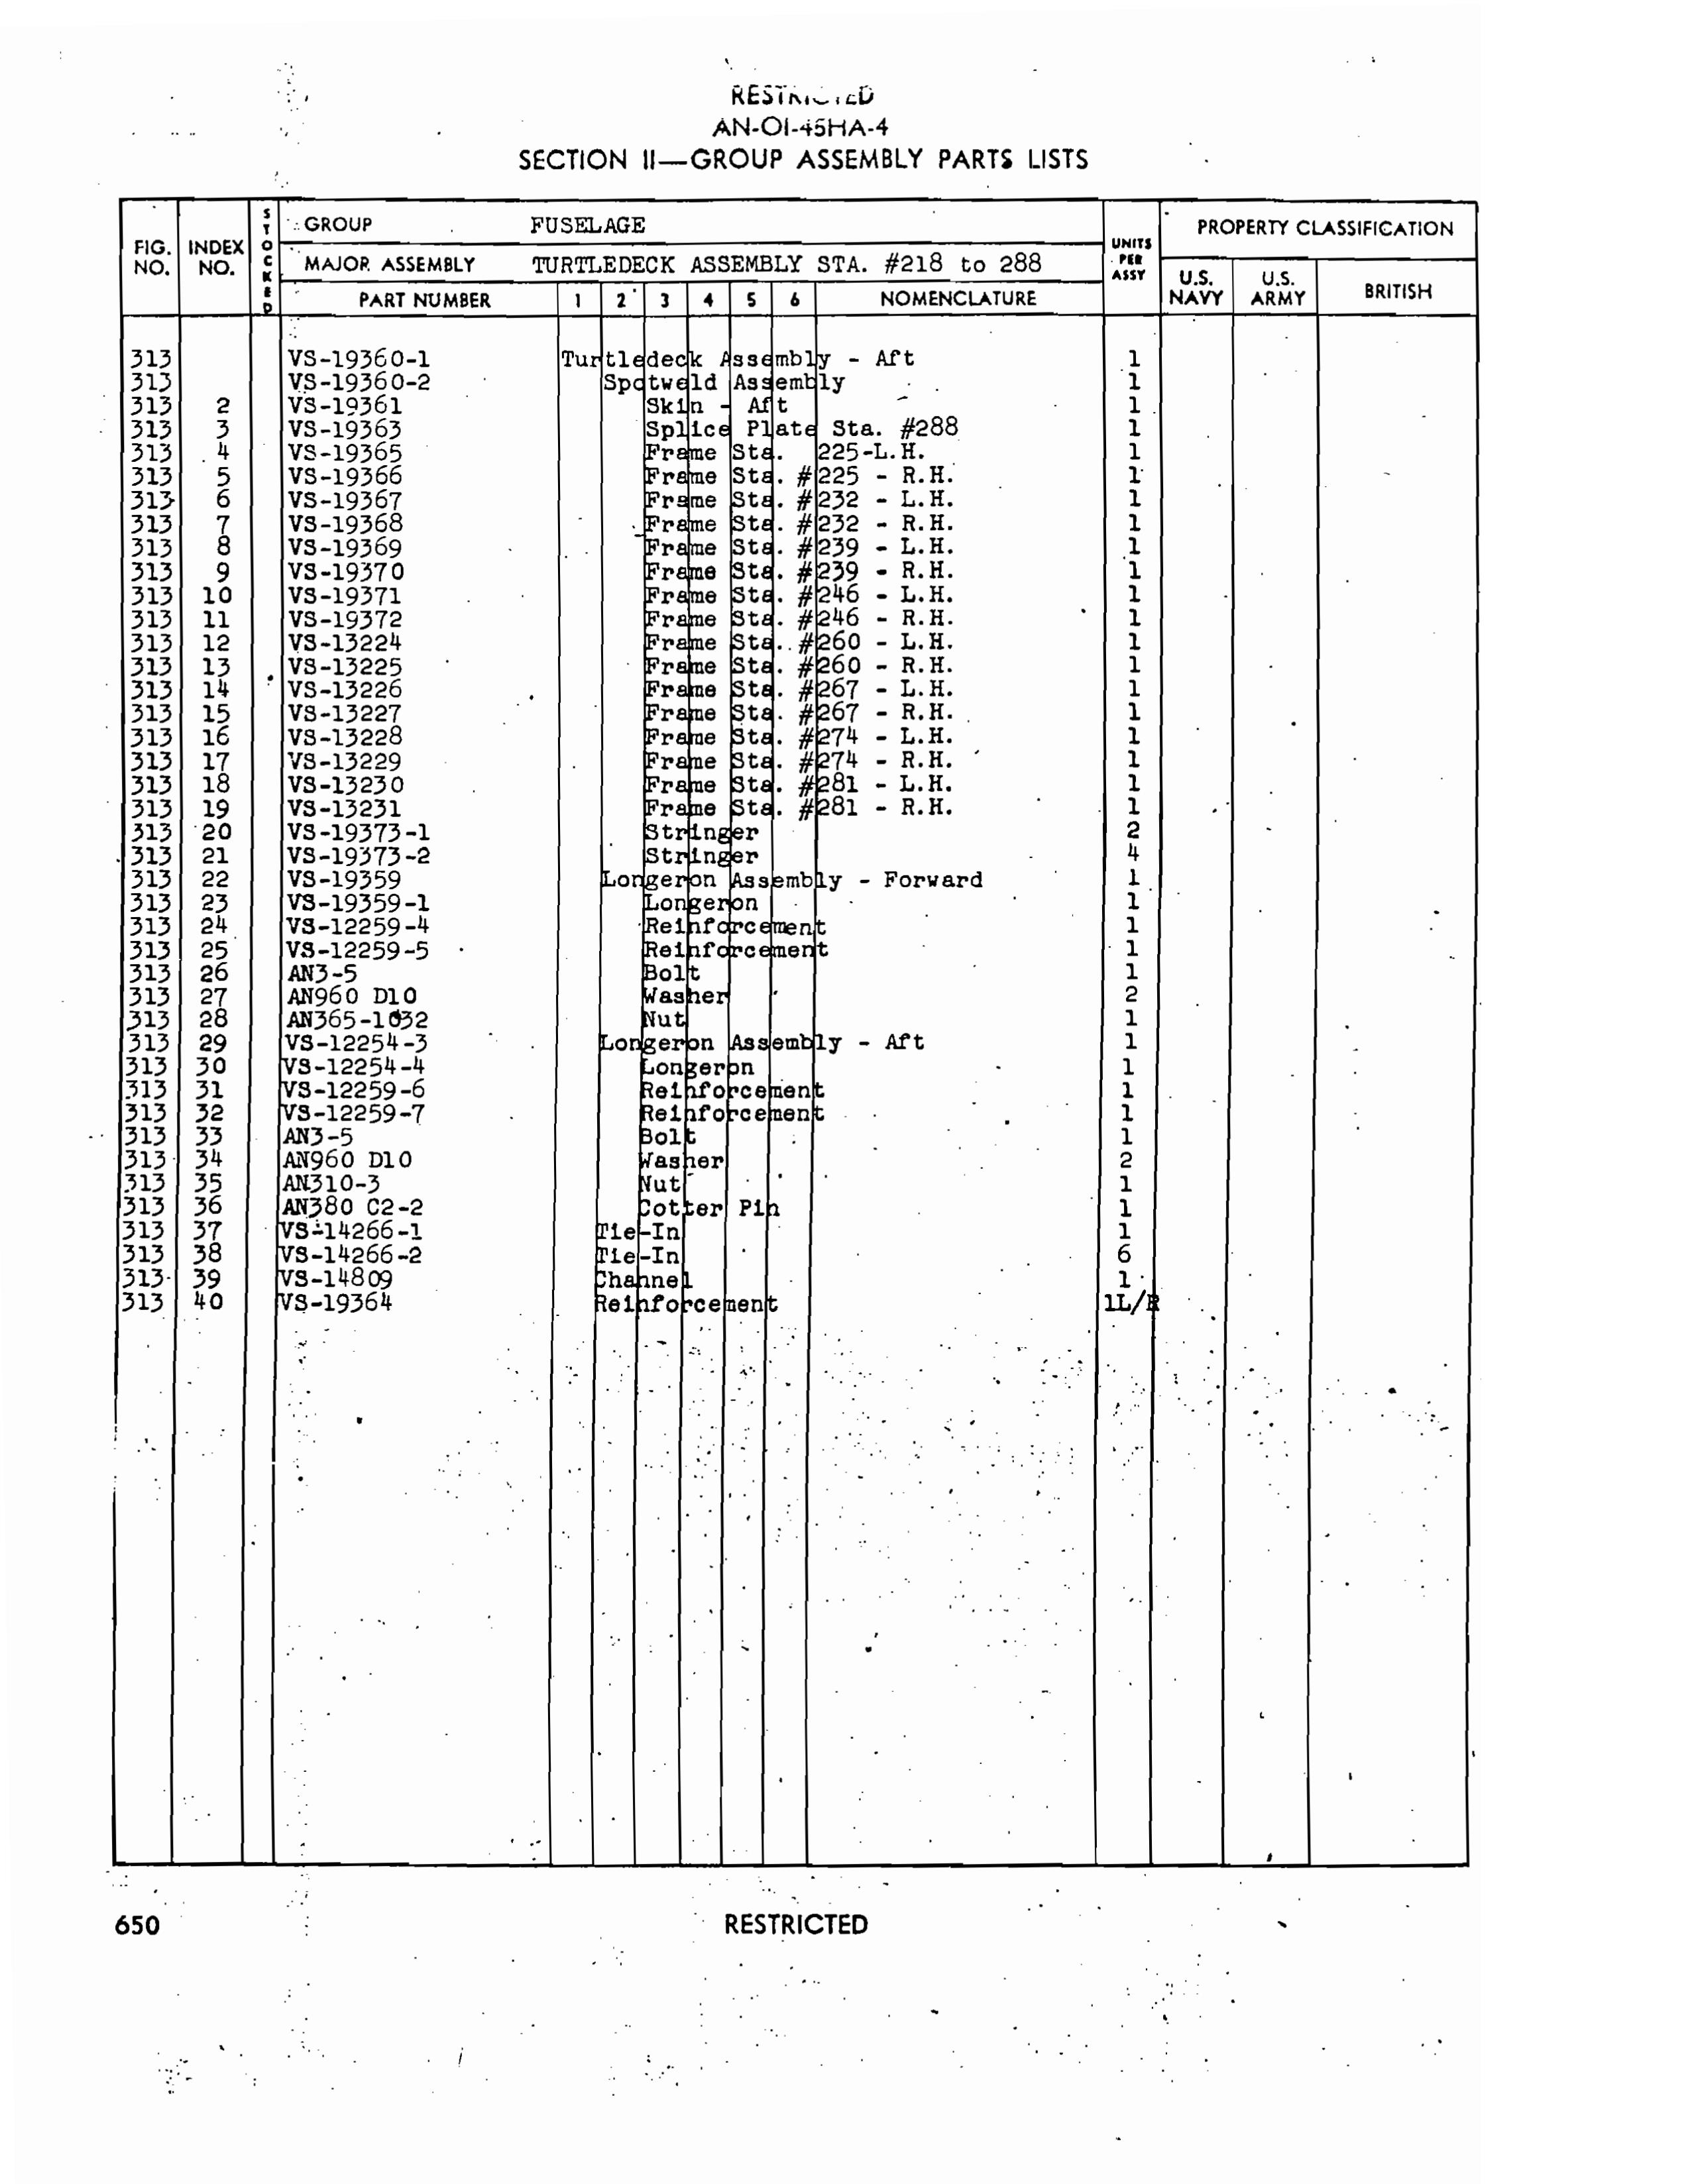 Sample page 681 from AirCorps Library document: Parts Catalog - Corsair